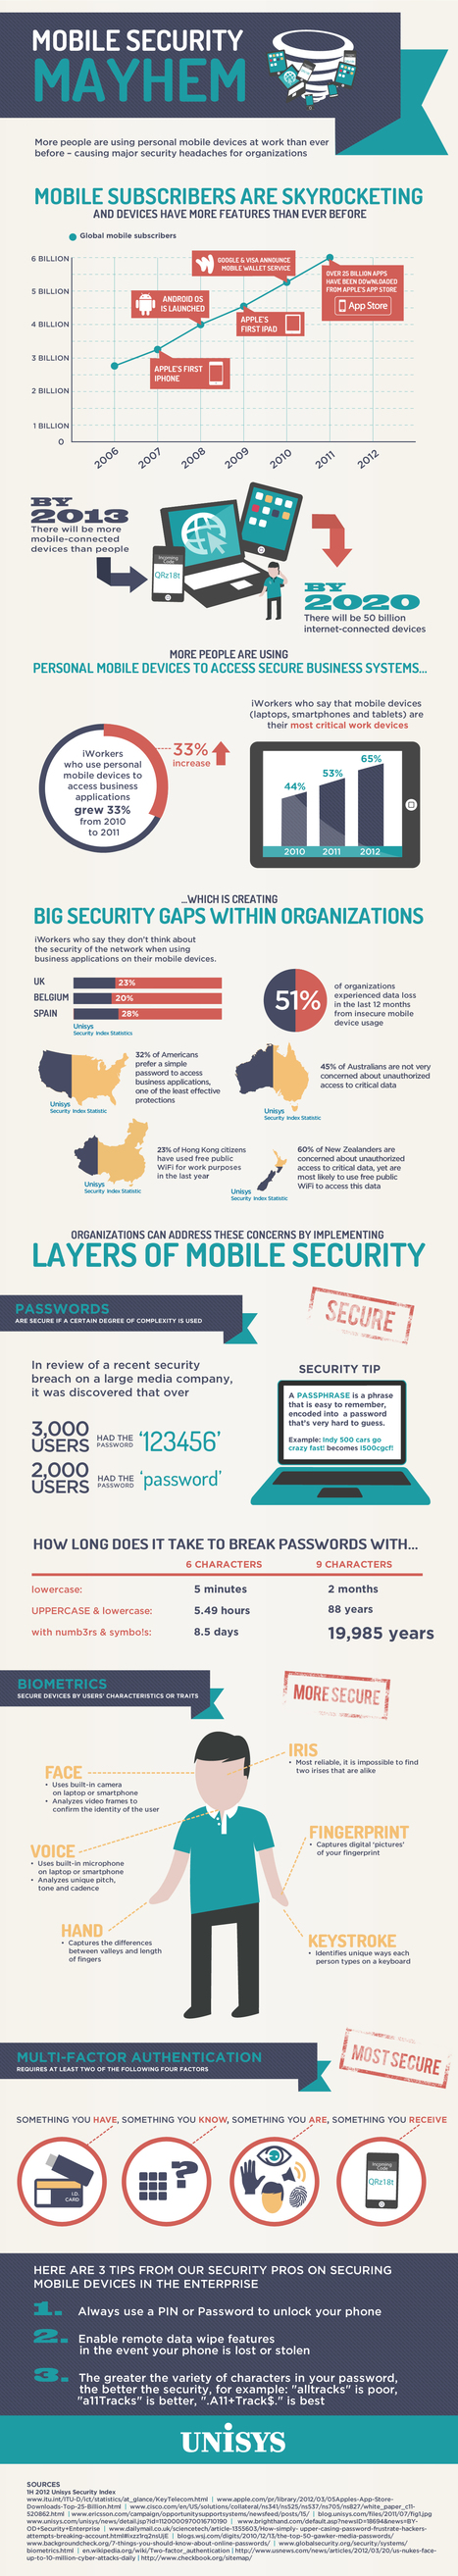 What Apple and Google are not Telling you About Mobile Device Security (infographic) - Forbes | #TRIC para los de LETRAS | Scoop.it